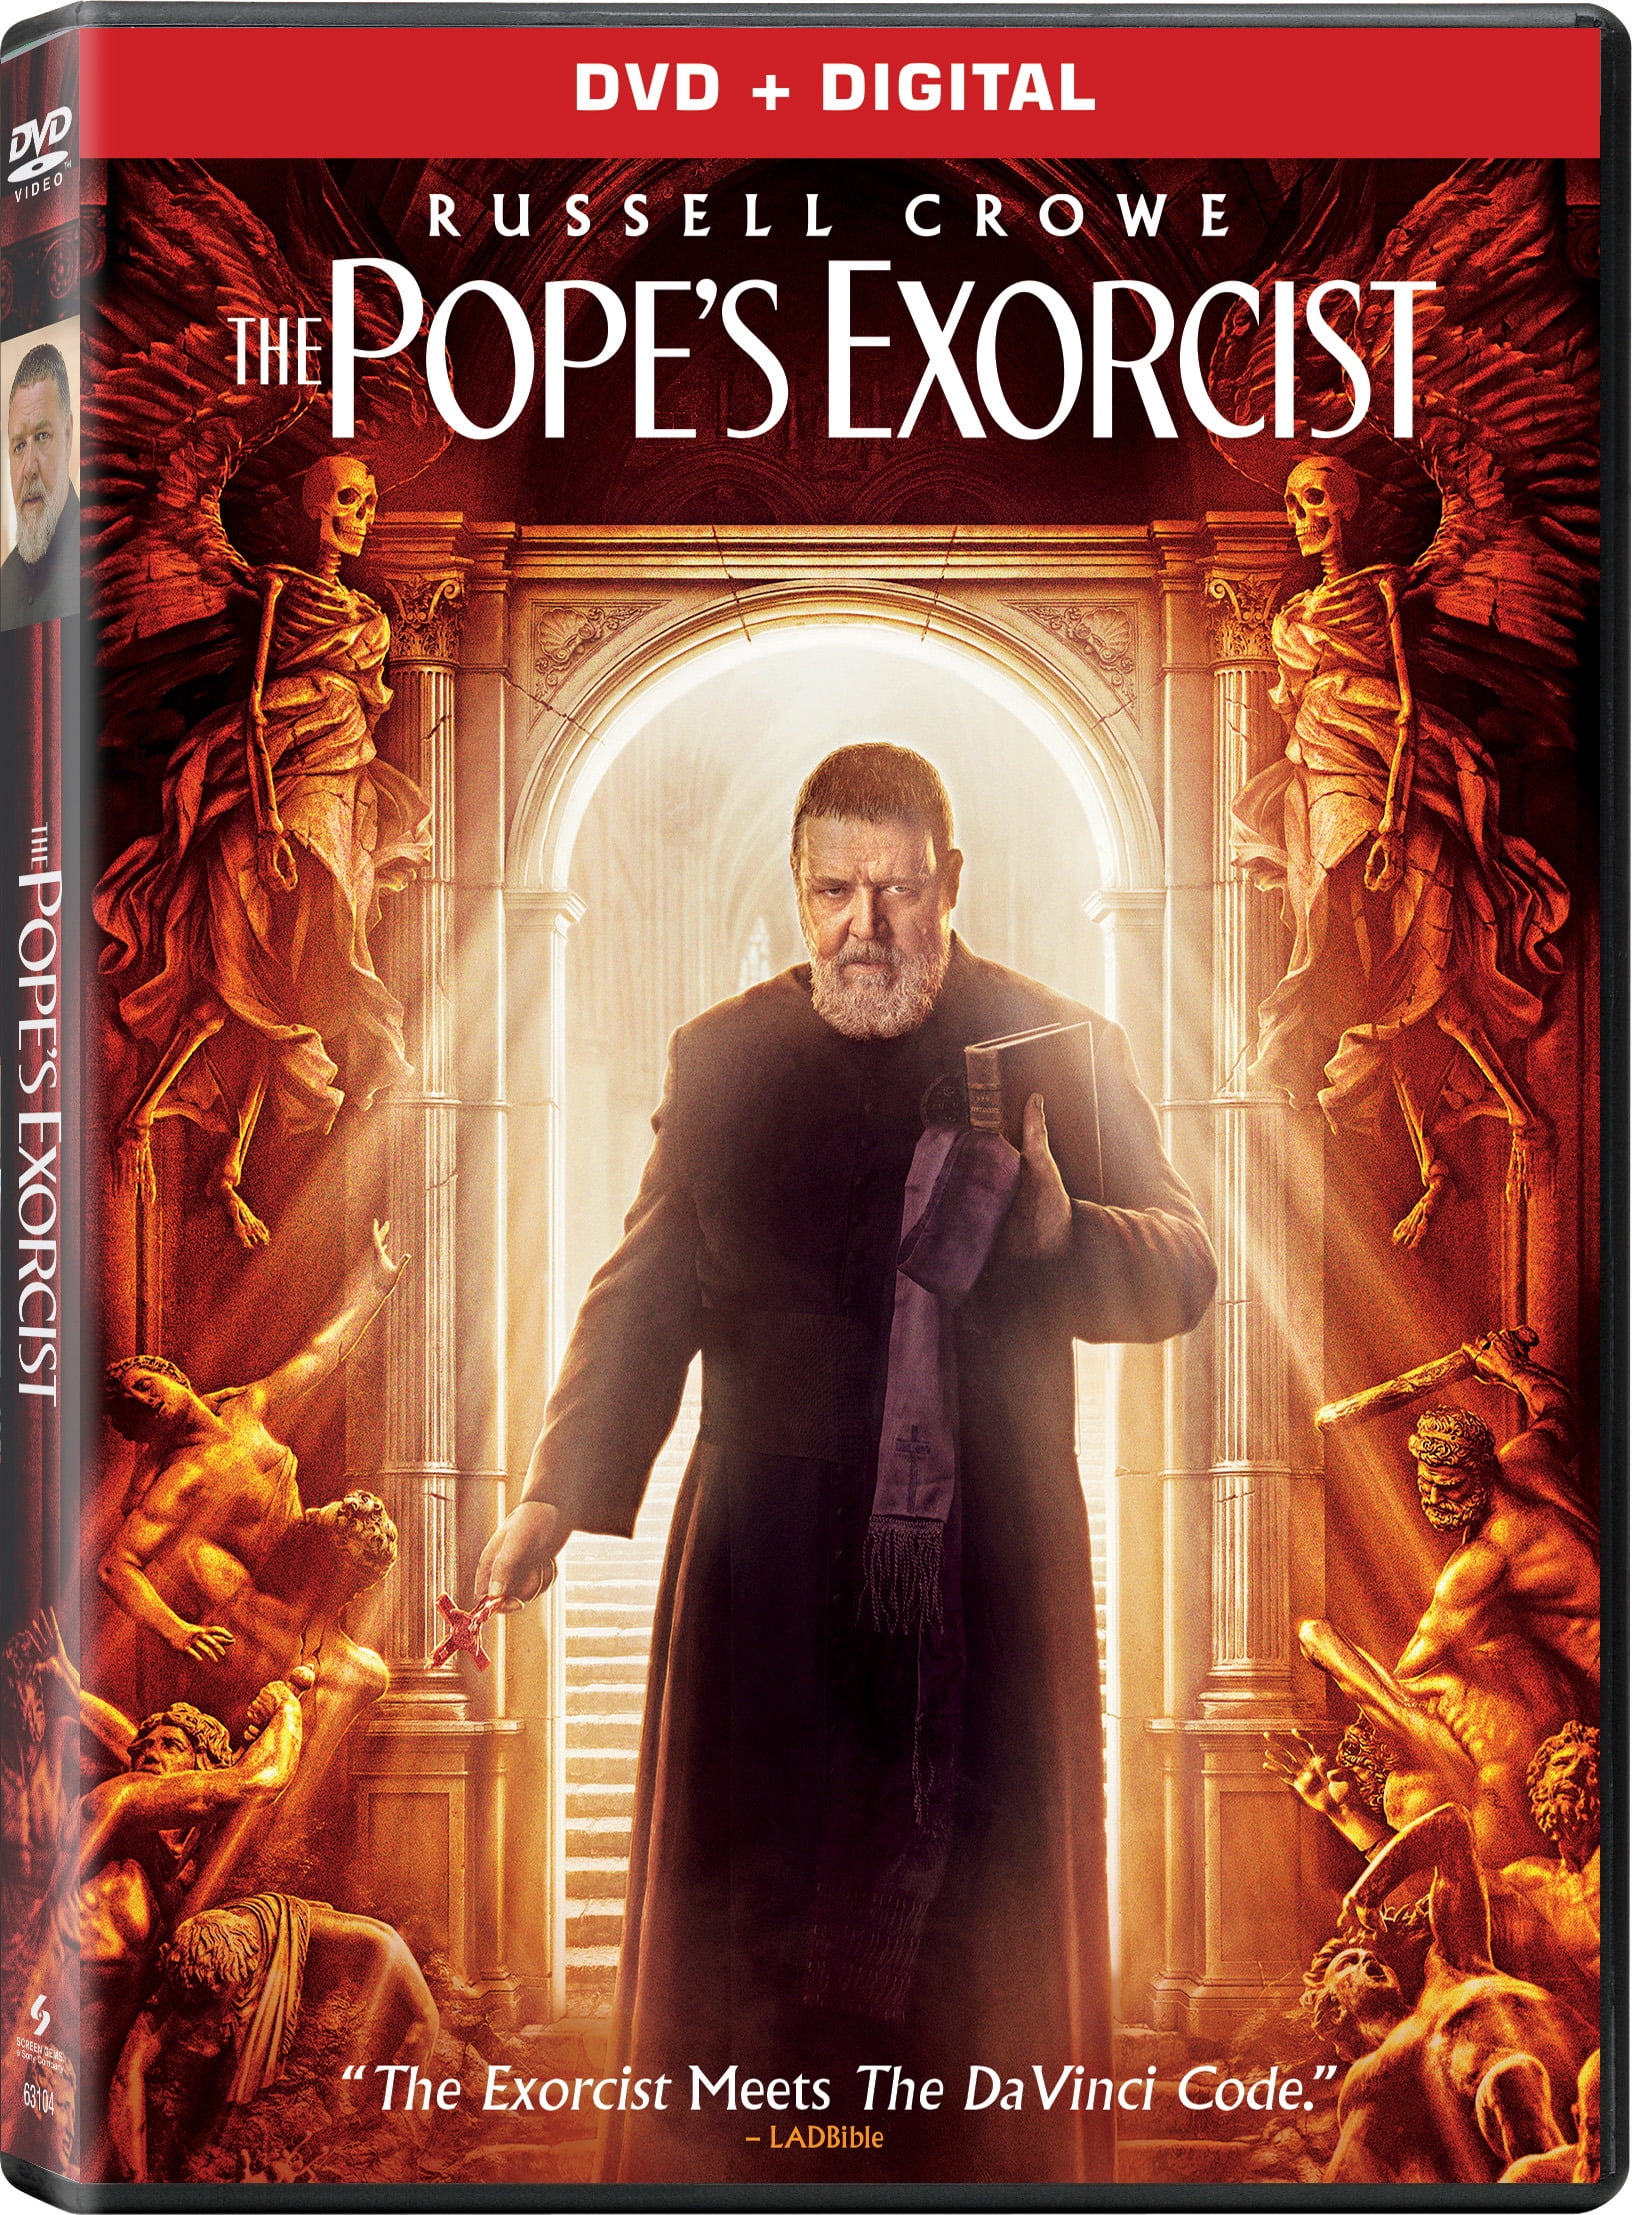 The Pope's Exorcist (DVD +Digital Copy)